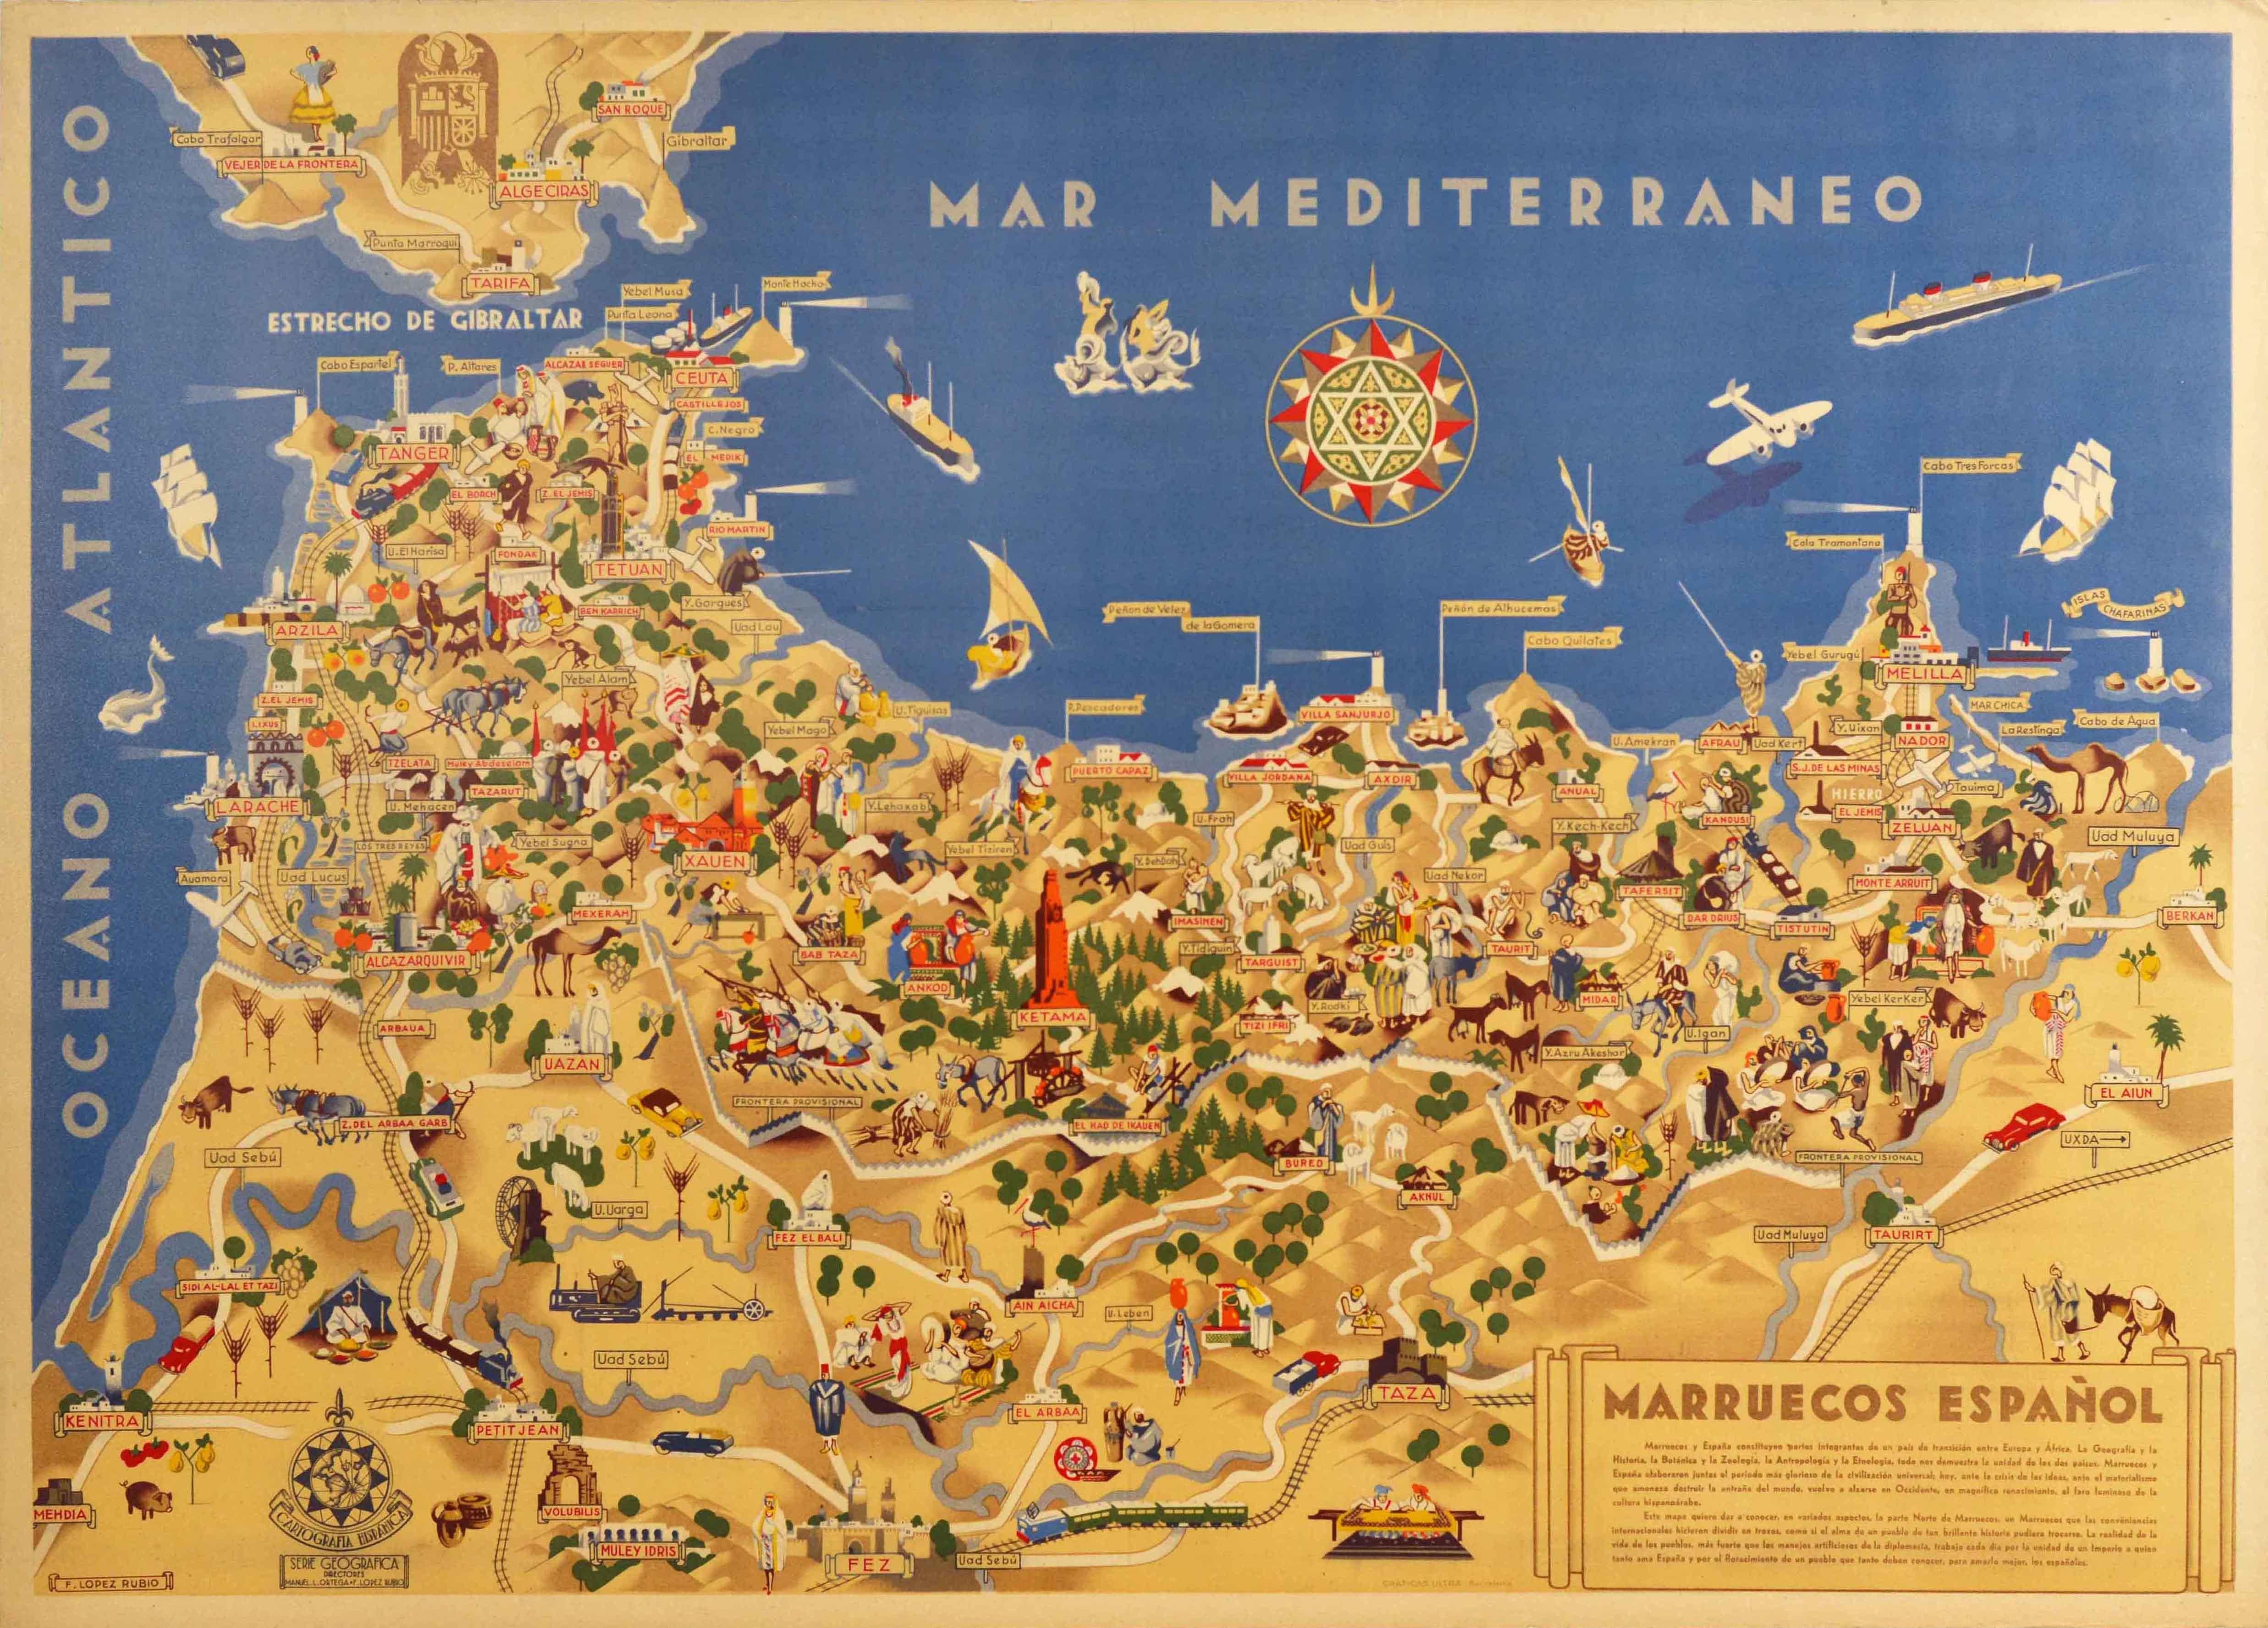 Original vintage travel map poster for Marruecos Espanol / Spanish Morocco featuring a great illustration of an outline of the Africa continent marking the major cities and locations, people and their lifestyle, agriculture and farming, cattle and